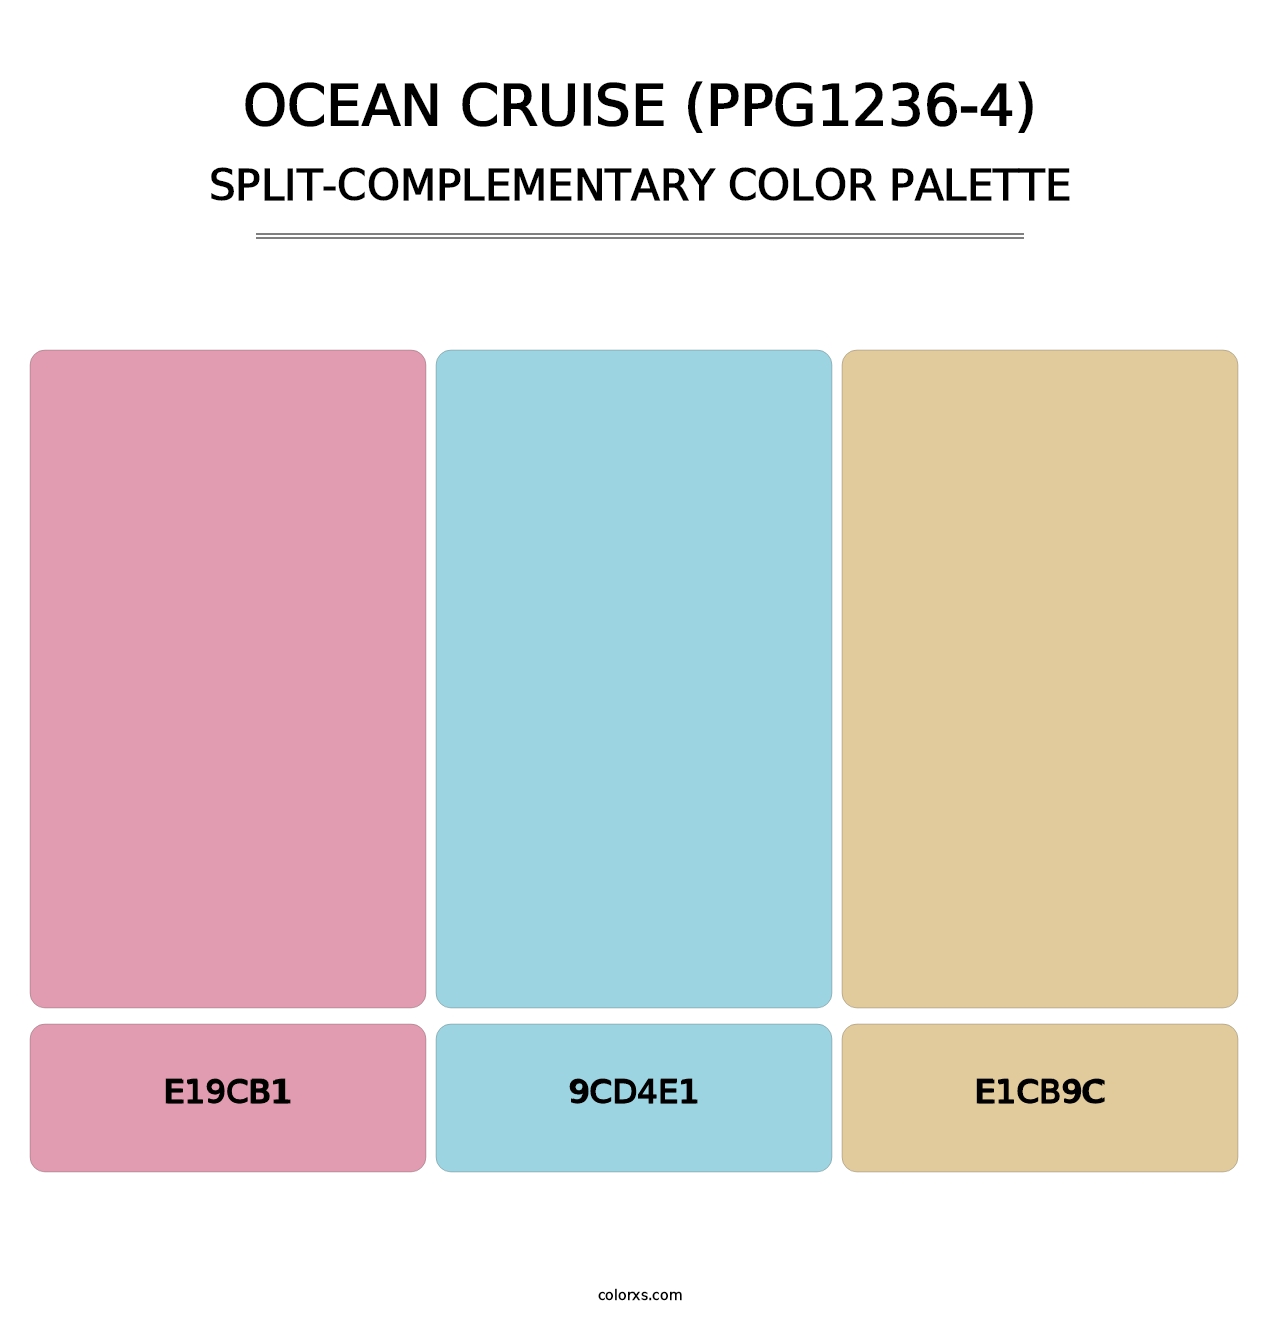 Ocean Cruise (PPG1236-4) - Split-Complementary Color Palette